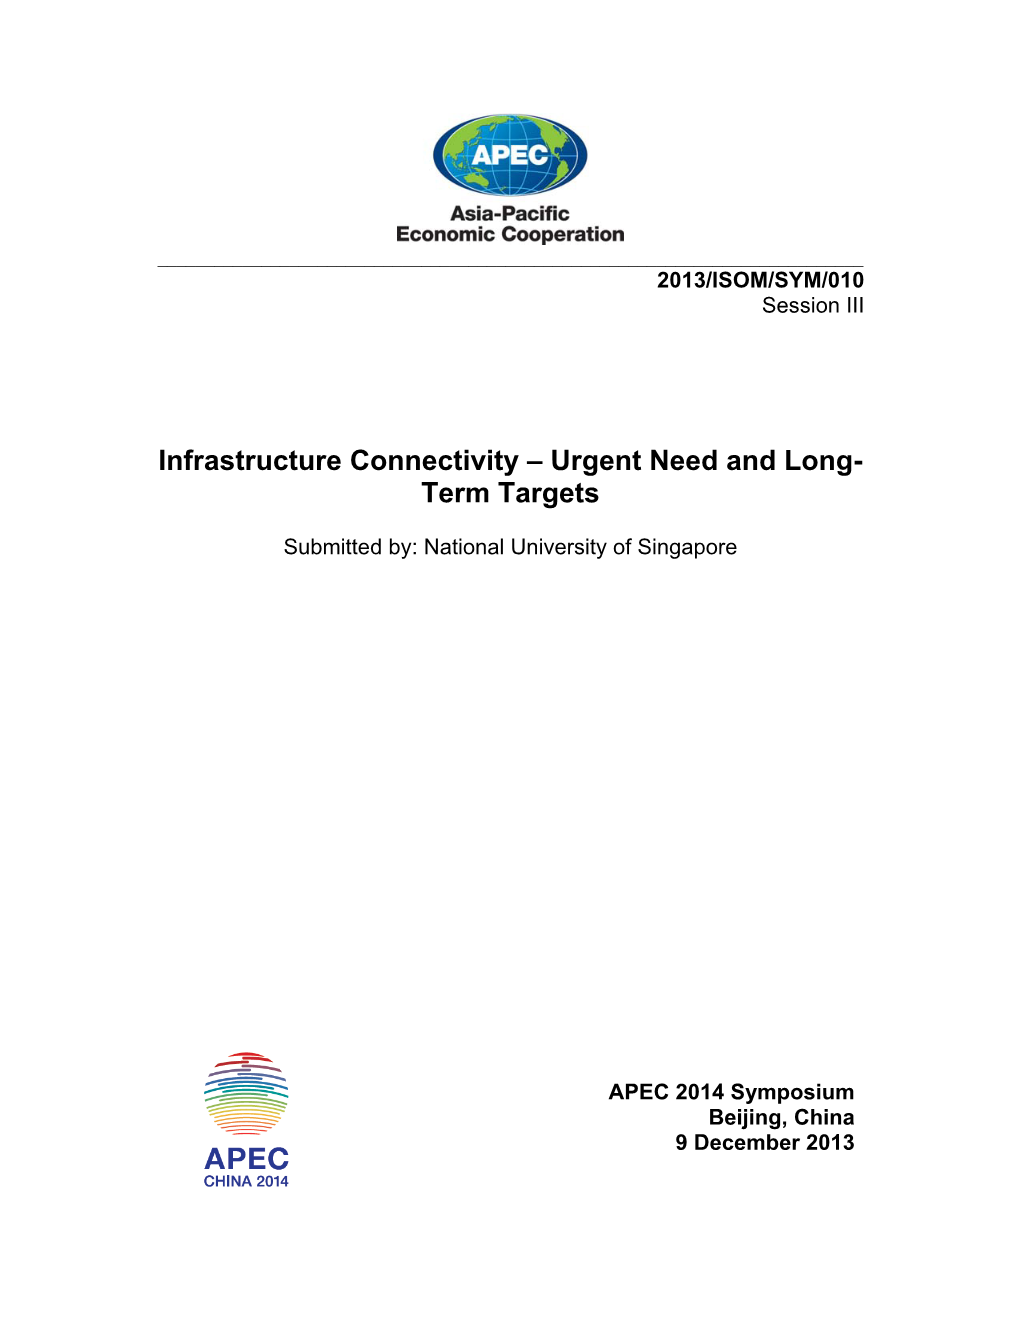 Infrastructure Connectivity – Urgent Need and Long- Term Targets